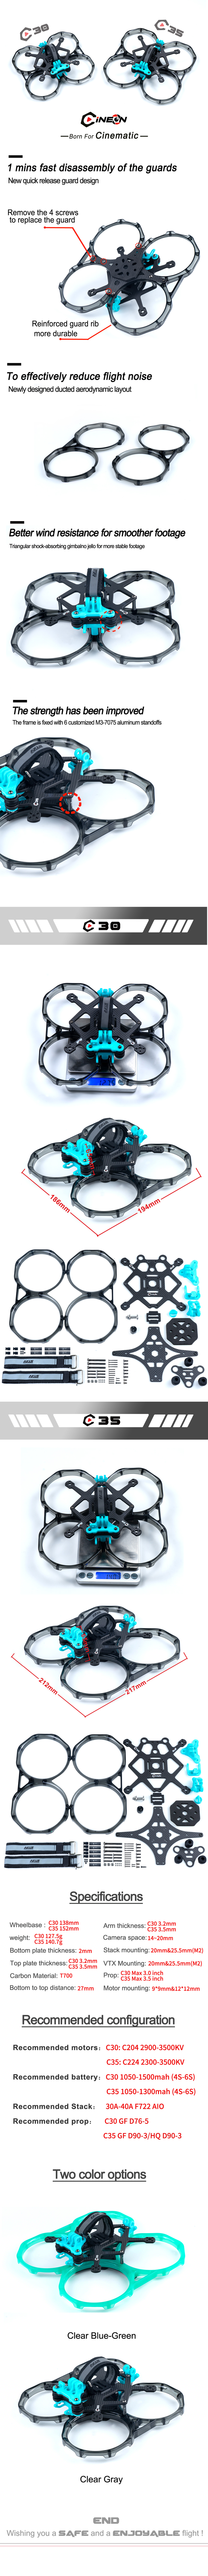 Axisflying C30 combo -Aluminum camera plates and GPS TPU- Get free 2 sets Props and 1 set guards  C30 frame kit combo cinematic drone,cinewhoop drone,longrange drone,freestyle drone,fpv drone,fpv quads,3.5" cinematic drone,3.5" cinematic quads,3.5" cinewhoop quads,3"cinewhoop quads,3"cinematic quads,2.5" cinewhoop quads,2.5" cinewhoop drones,2.5" indoor quads,2" indoor quads,2" indoor drones,the same as dji quads